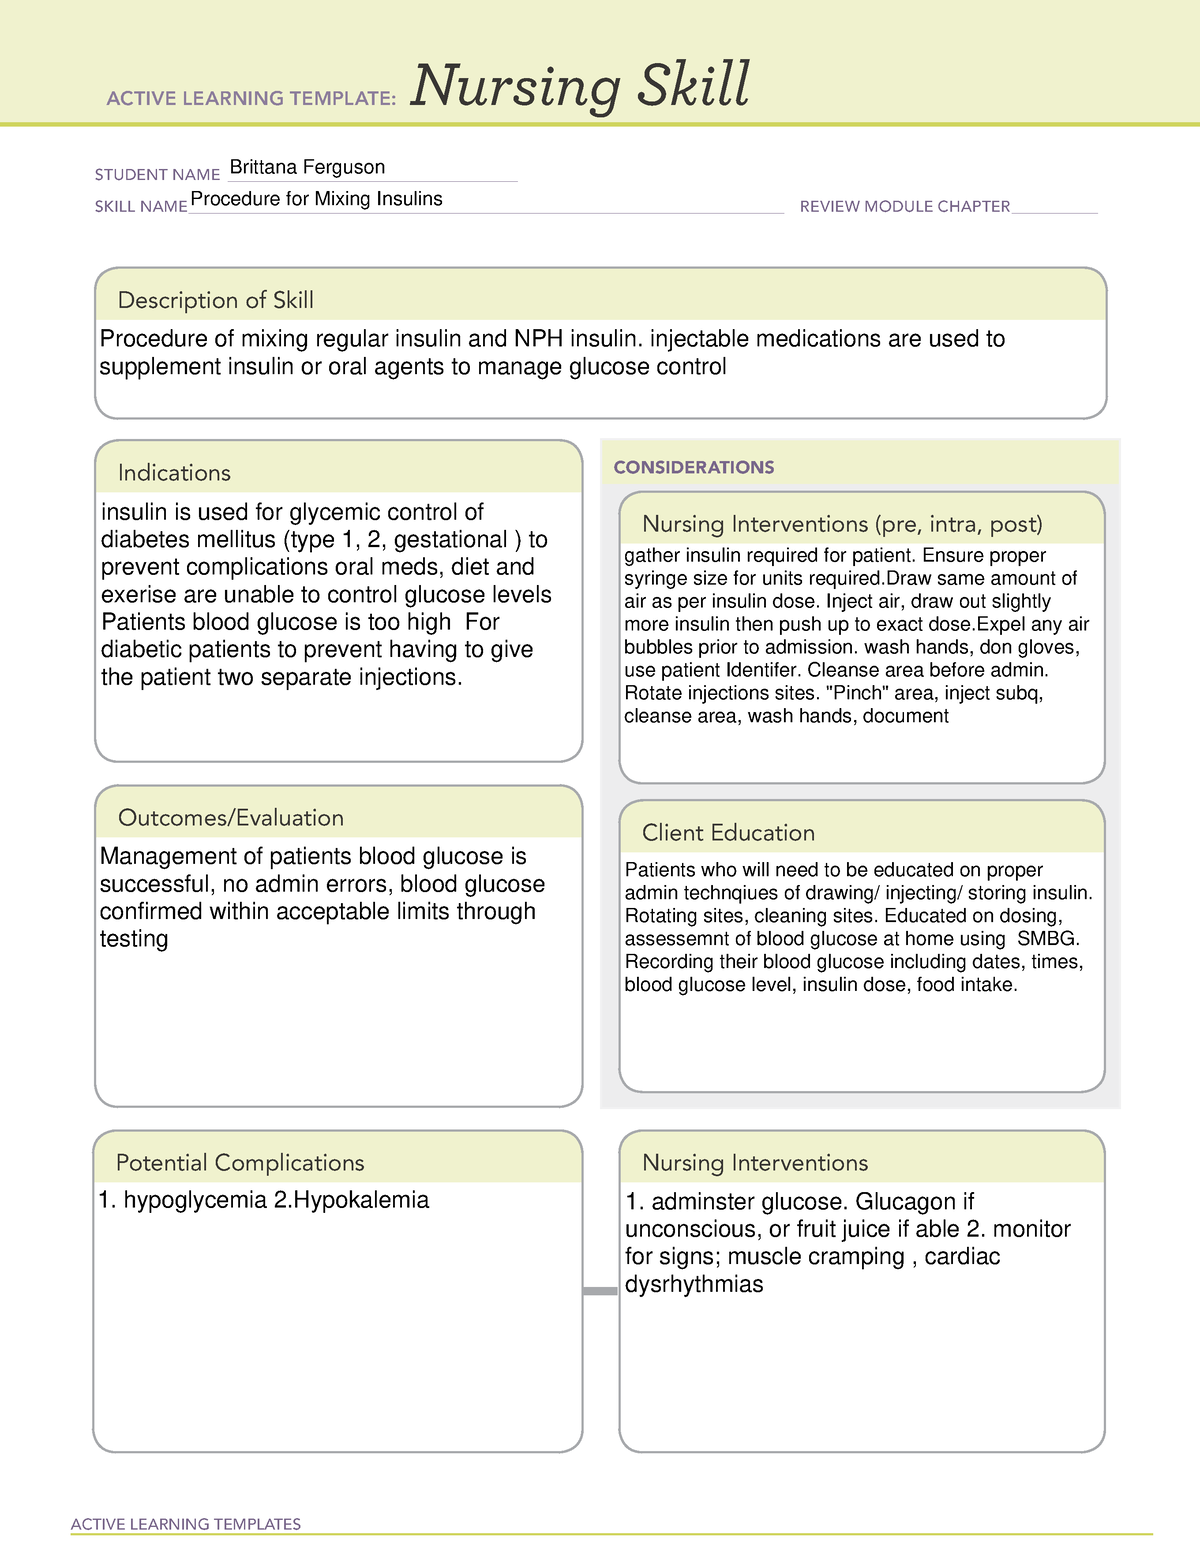 Mixing insulin - gegee - ACTIVE LEARNING TEMPLATES Nursing Skill ...